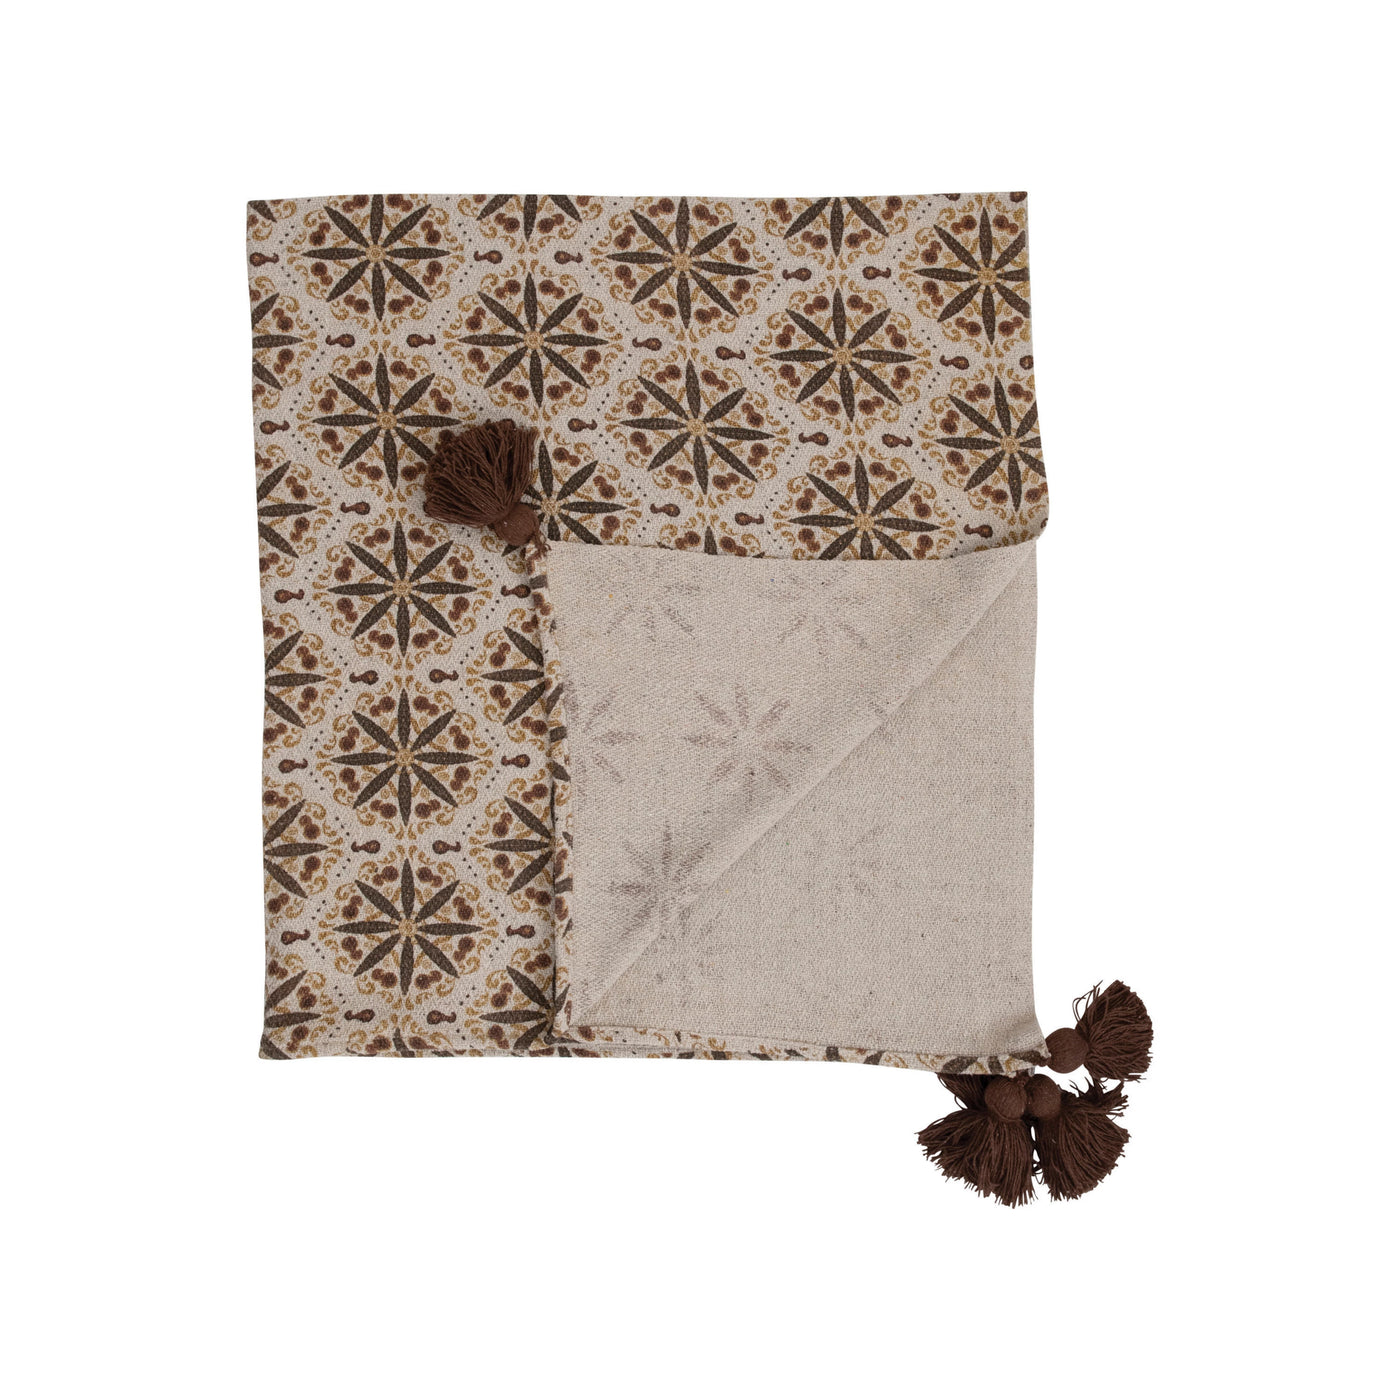 Recycled Cotton Blend Throw with Floral Medallion Print and Tassels